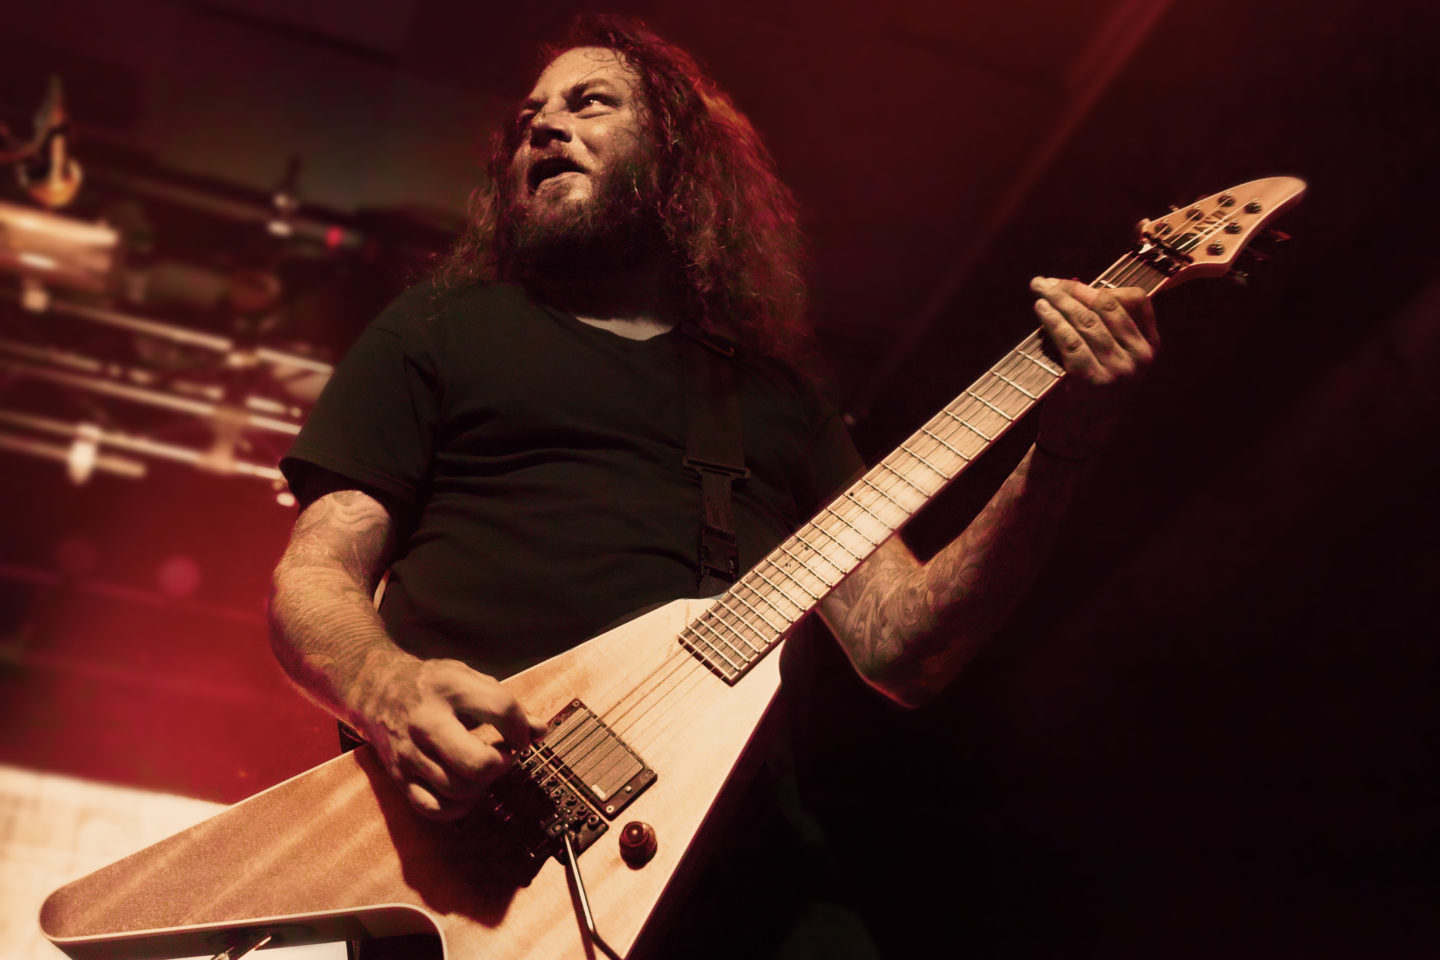 The Black Dahlia Murder at Concord Music Hall by Sanchi Engineer